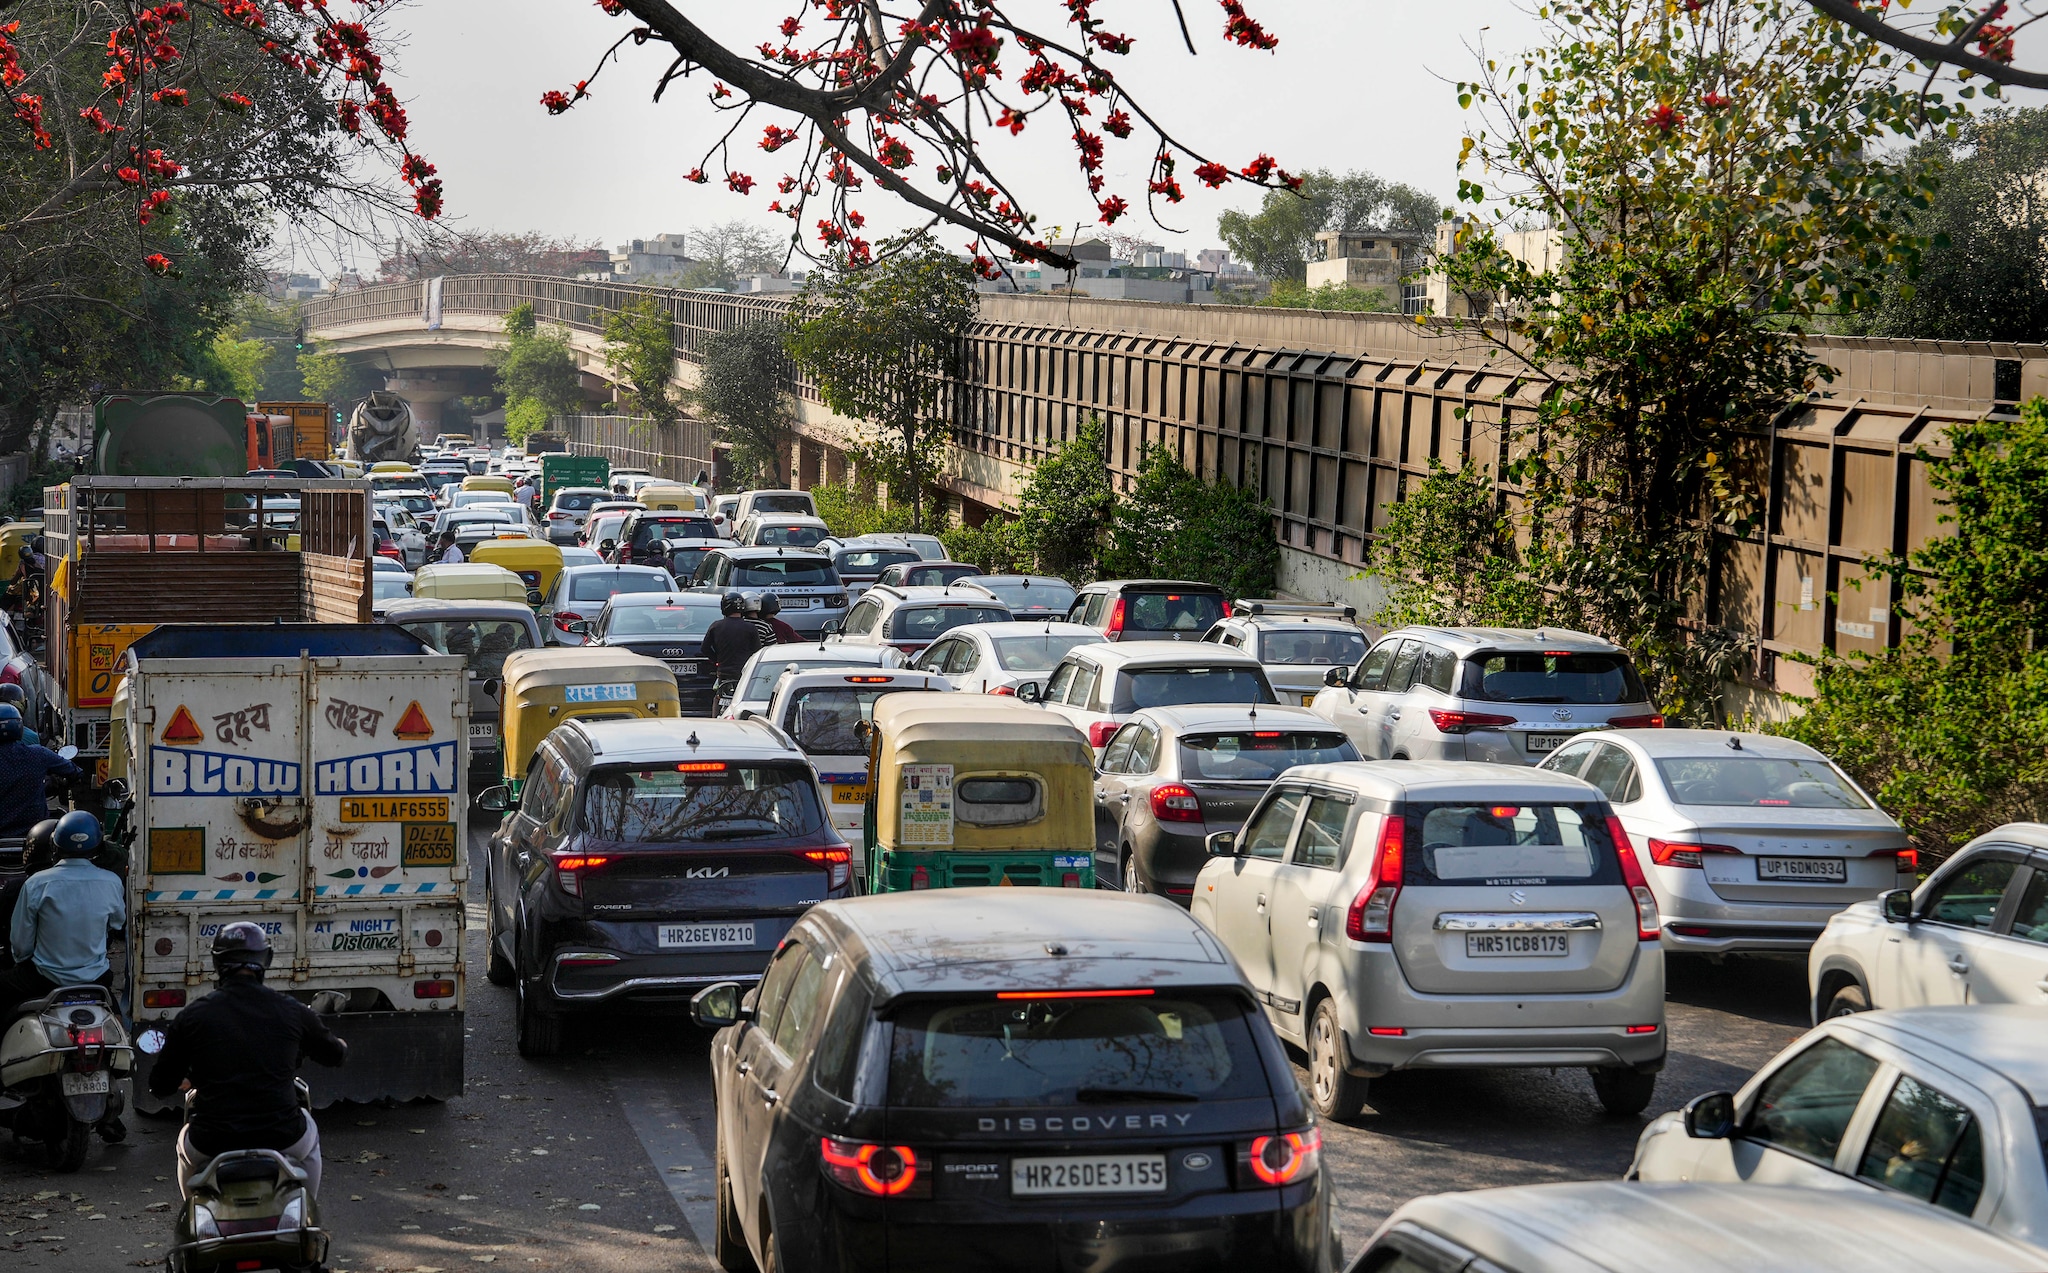 Delhi to have 3 new bypass roads - NCRHomes.com - Latest News on NCR-Delhi  Realty & Infra Projects